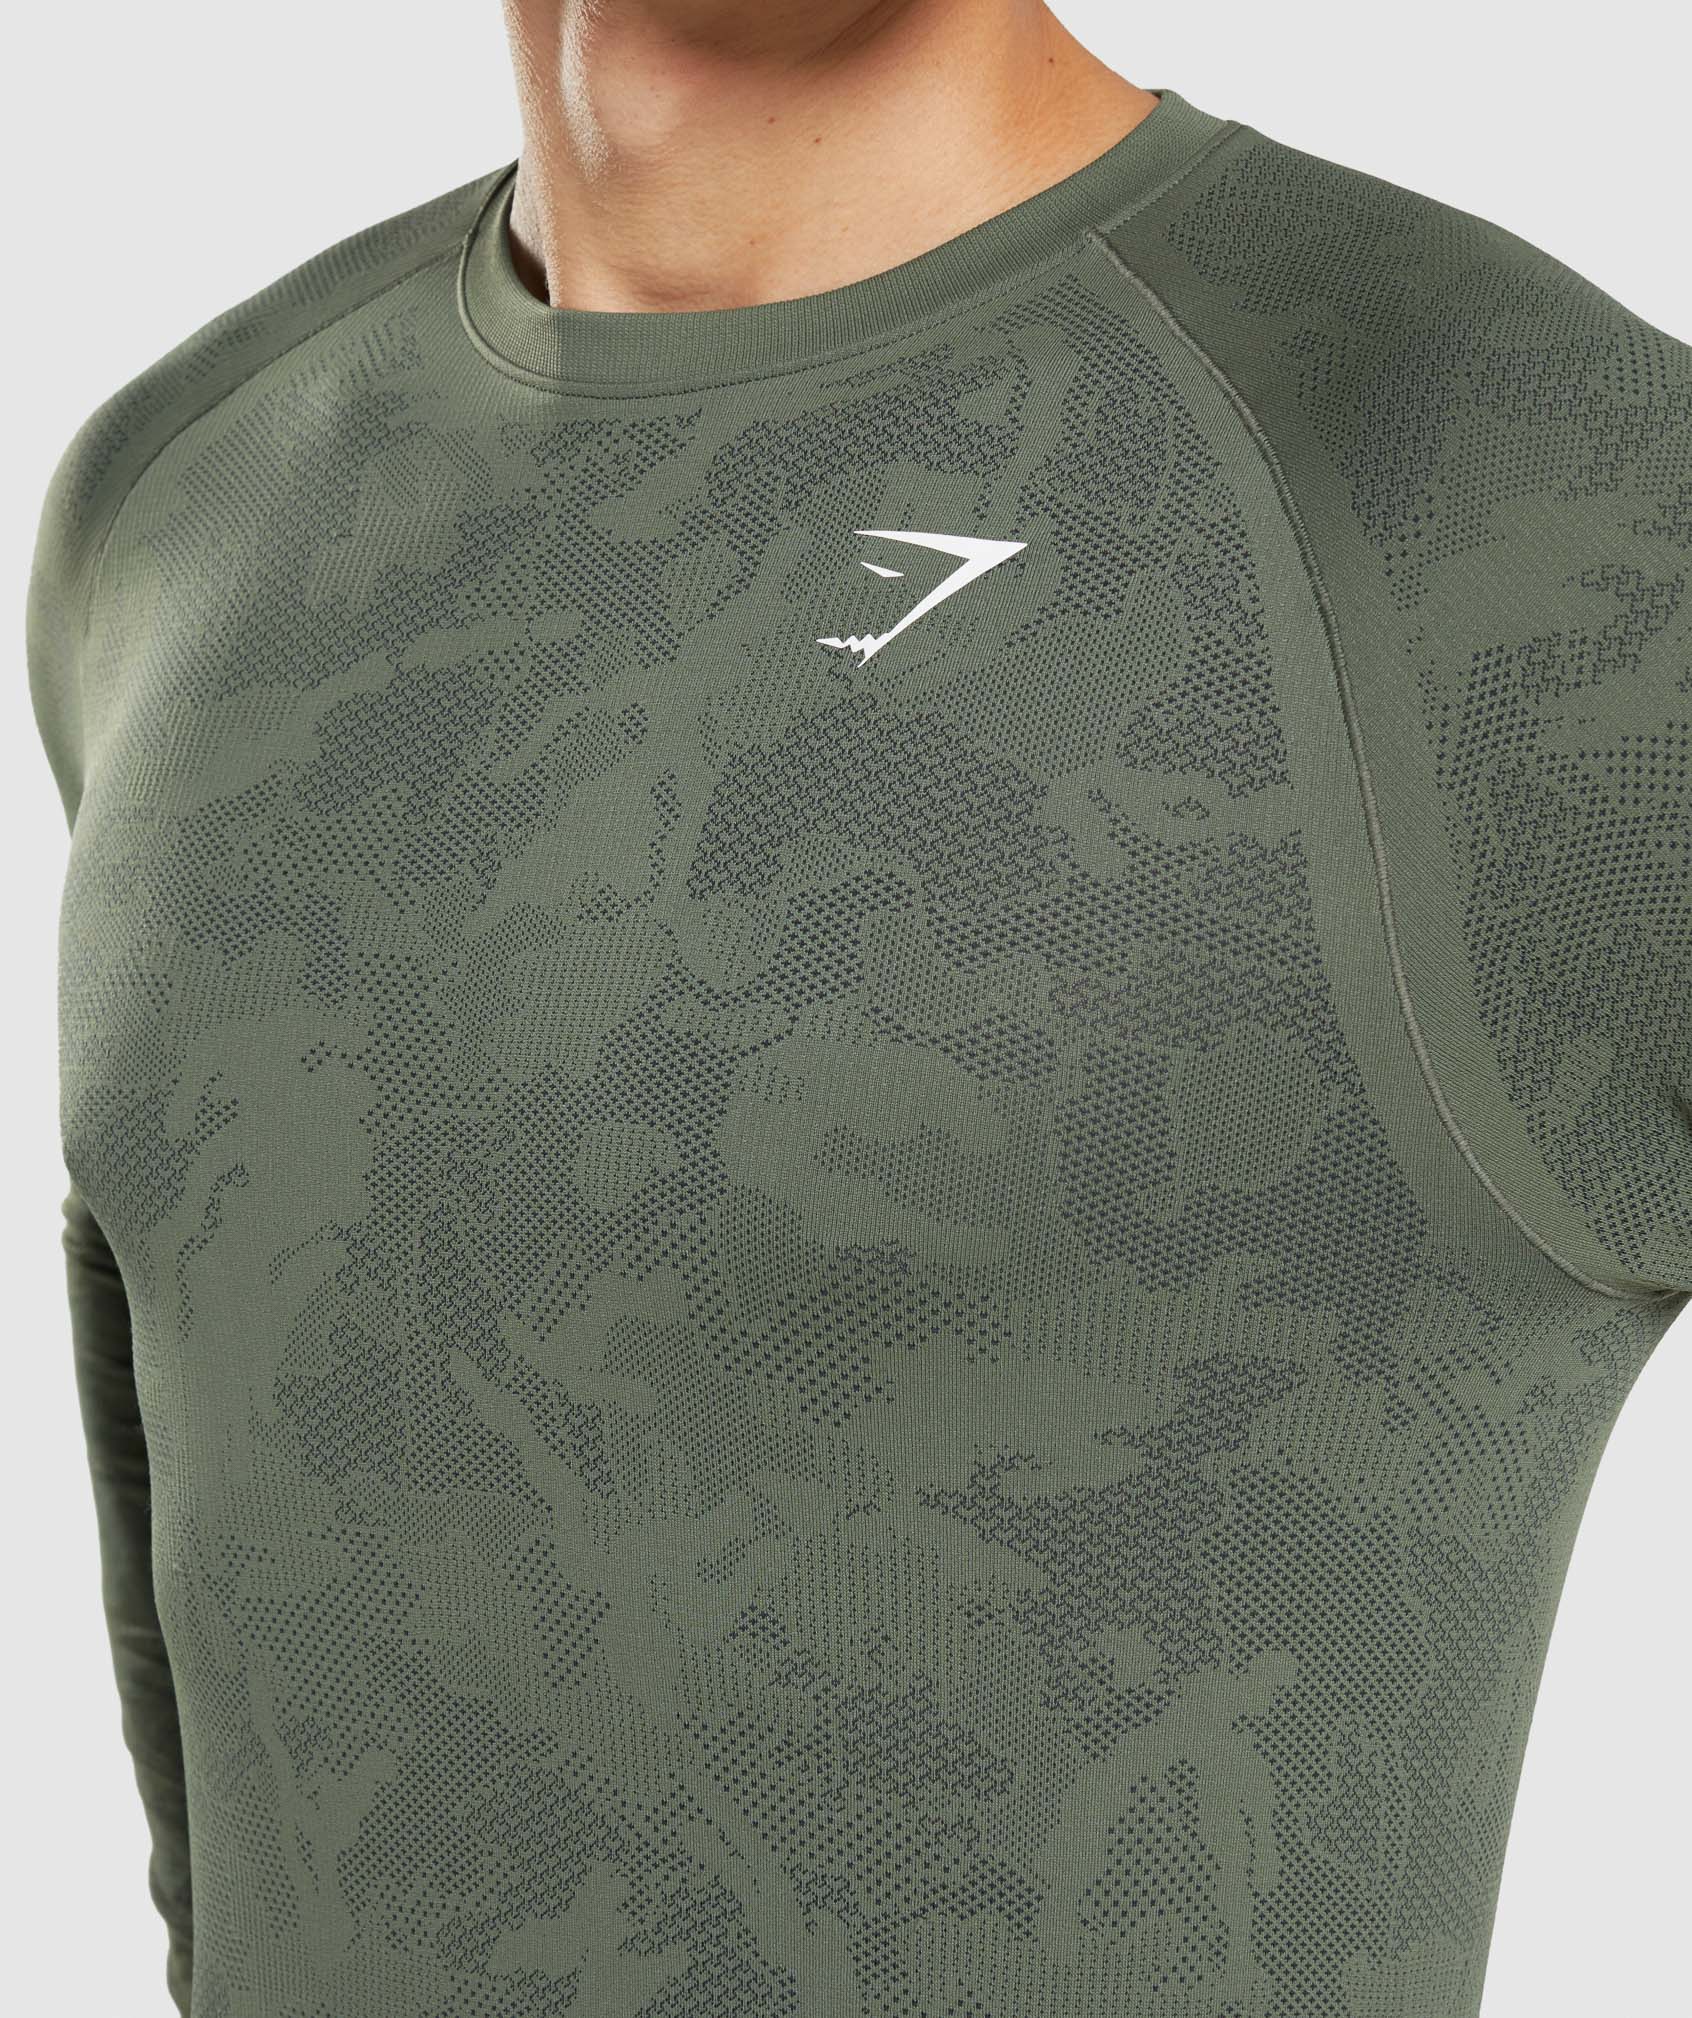 Geo Seamless Long Sleeve T-Shirt in Core Olive/Black